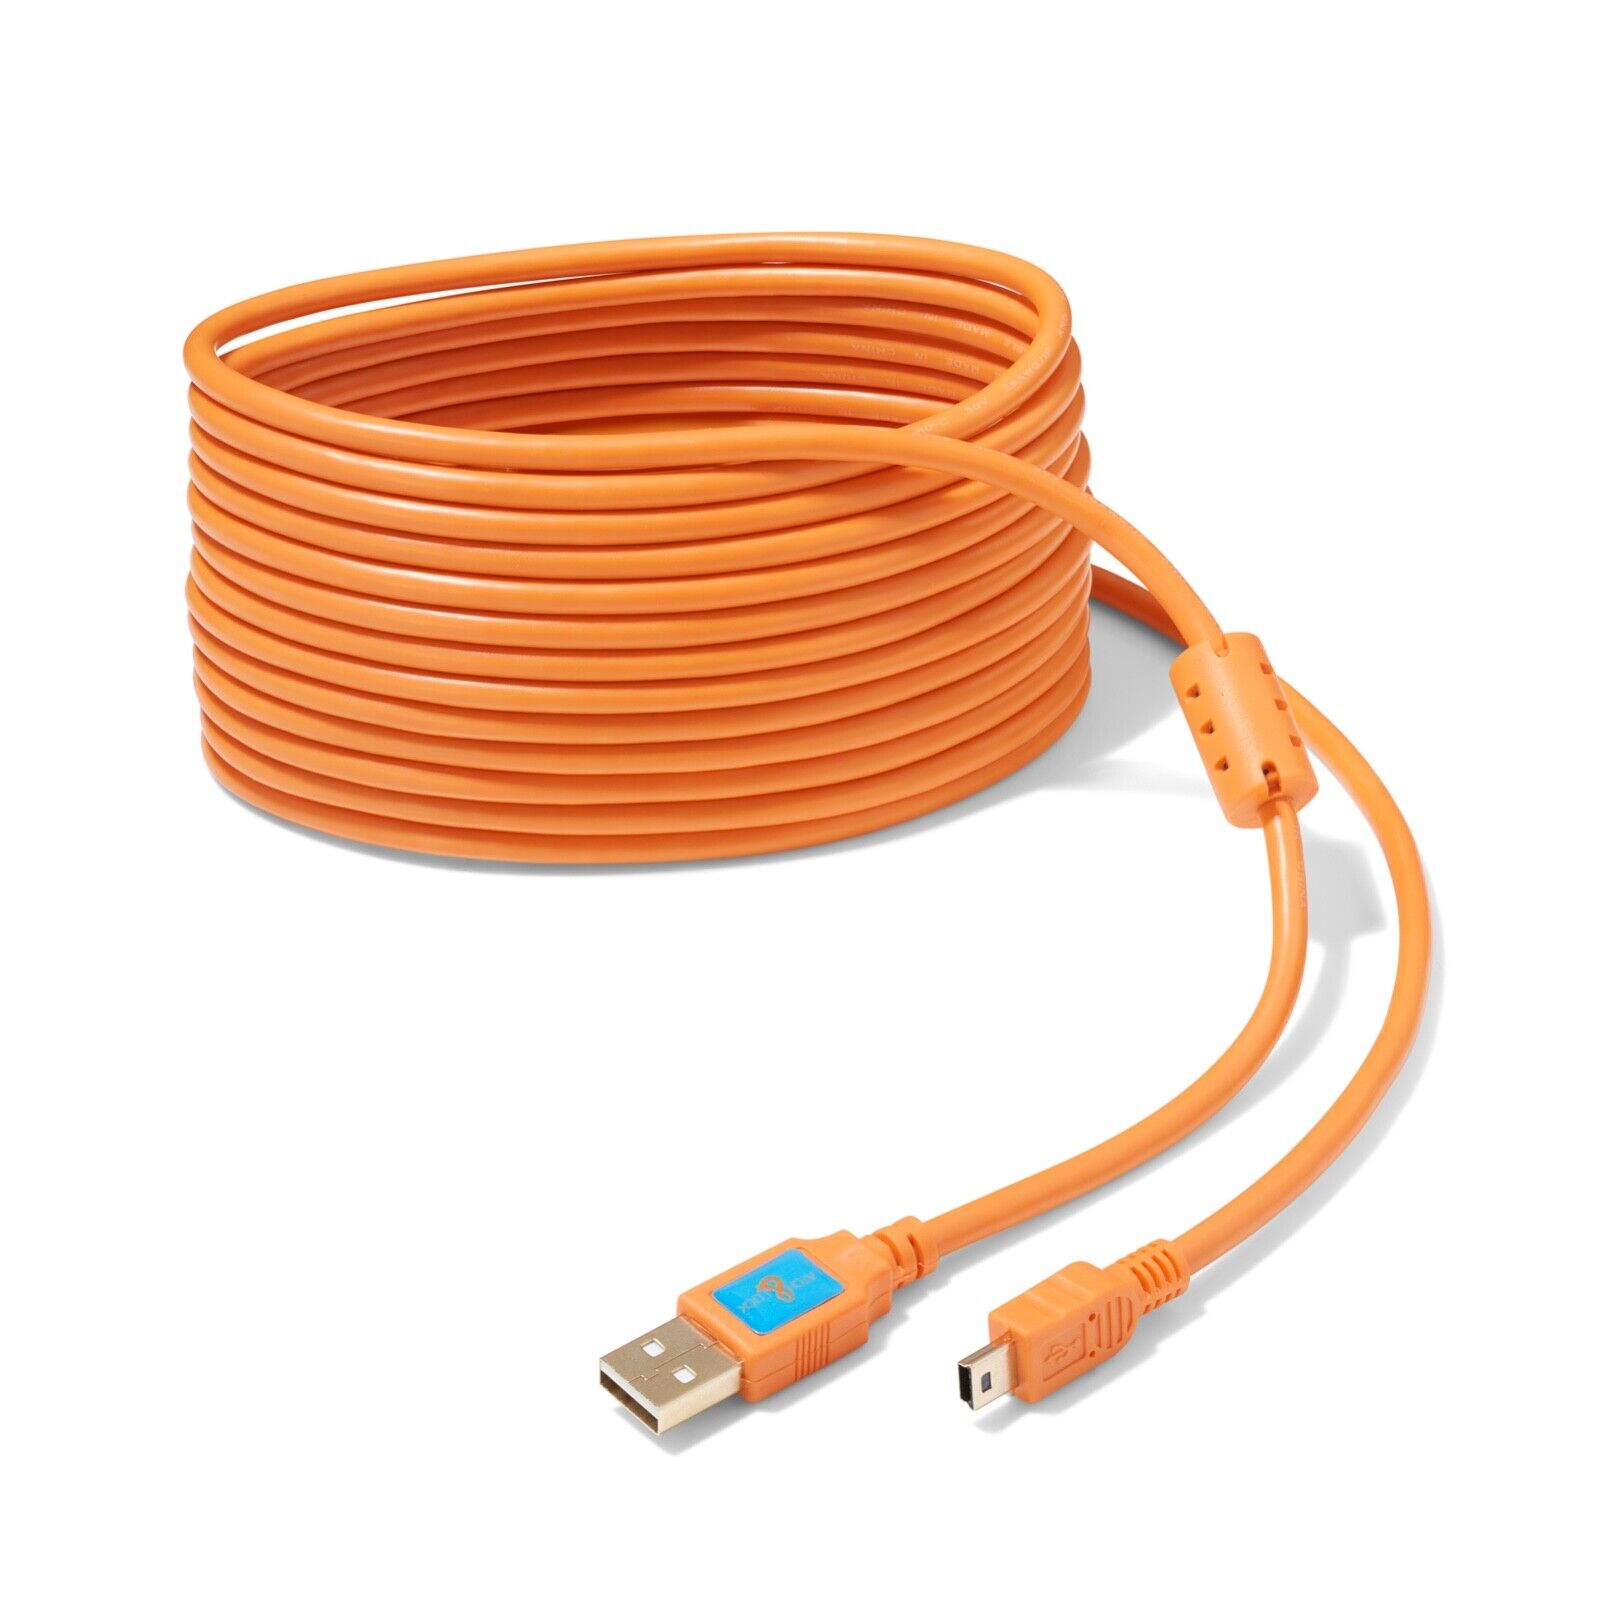 Latch and Lock 15 Foot (4.5M) USB 2.0 to Mini-B 5 Pin Gold Plated Cable Orange 